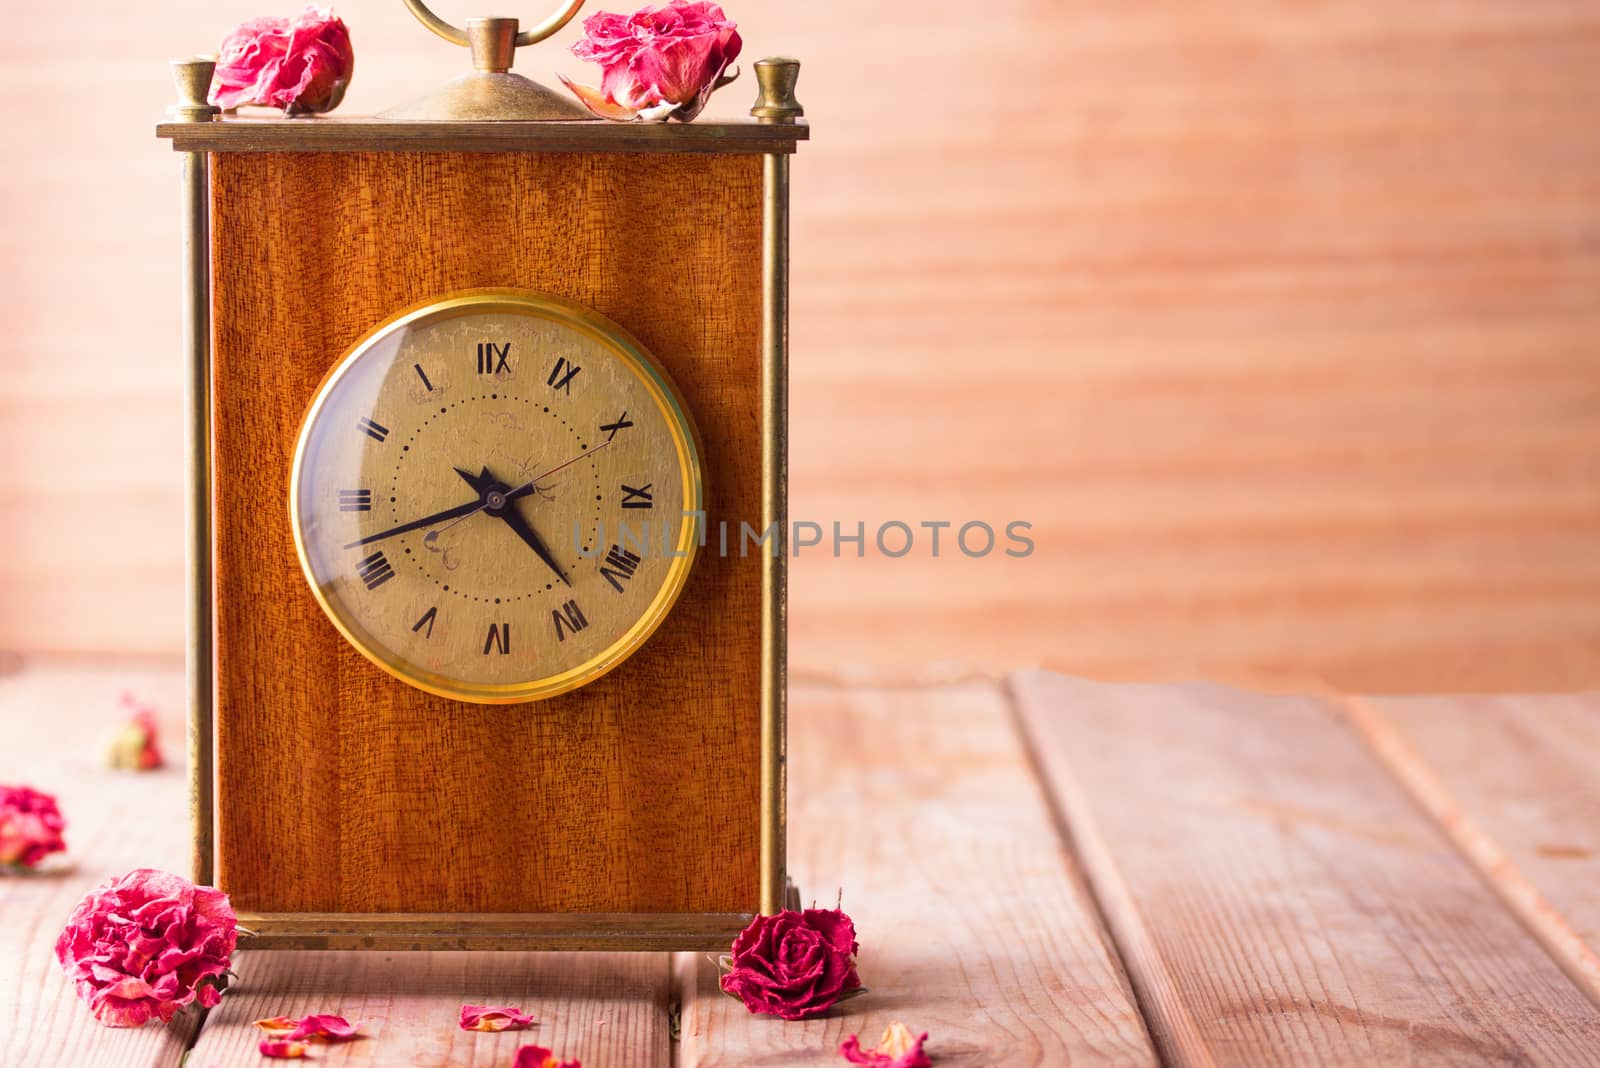 vintage style picture of an arrangement with a bouquet of roses, an clock